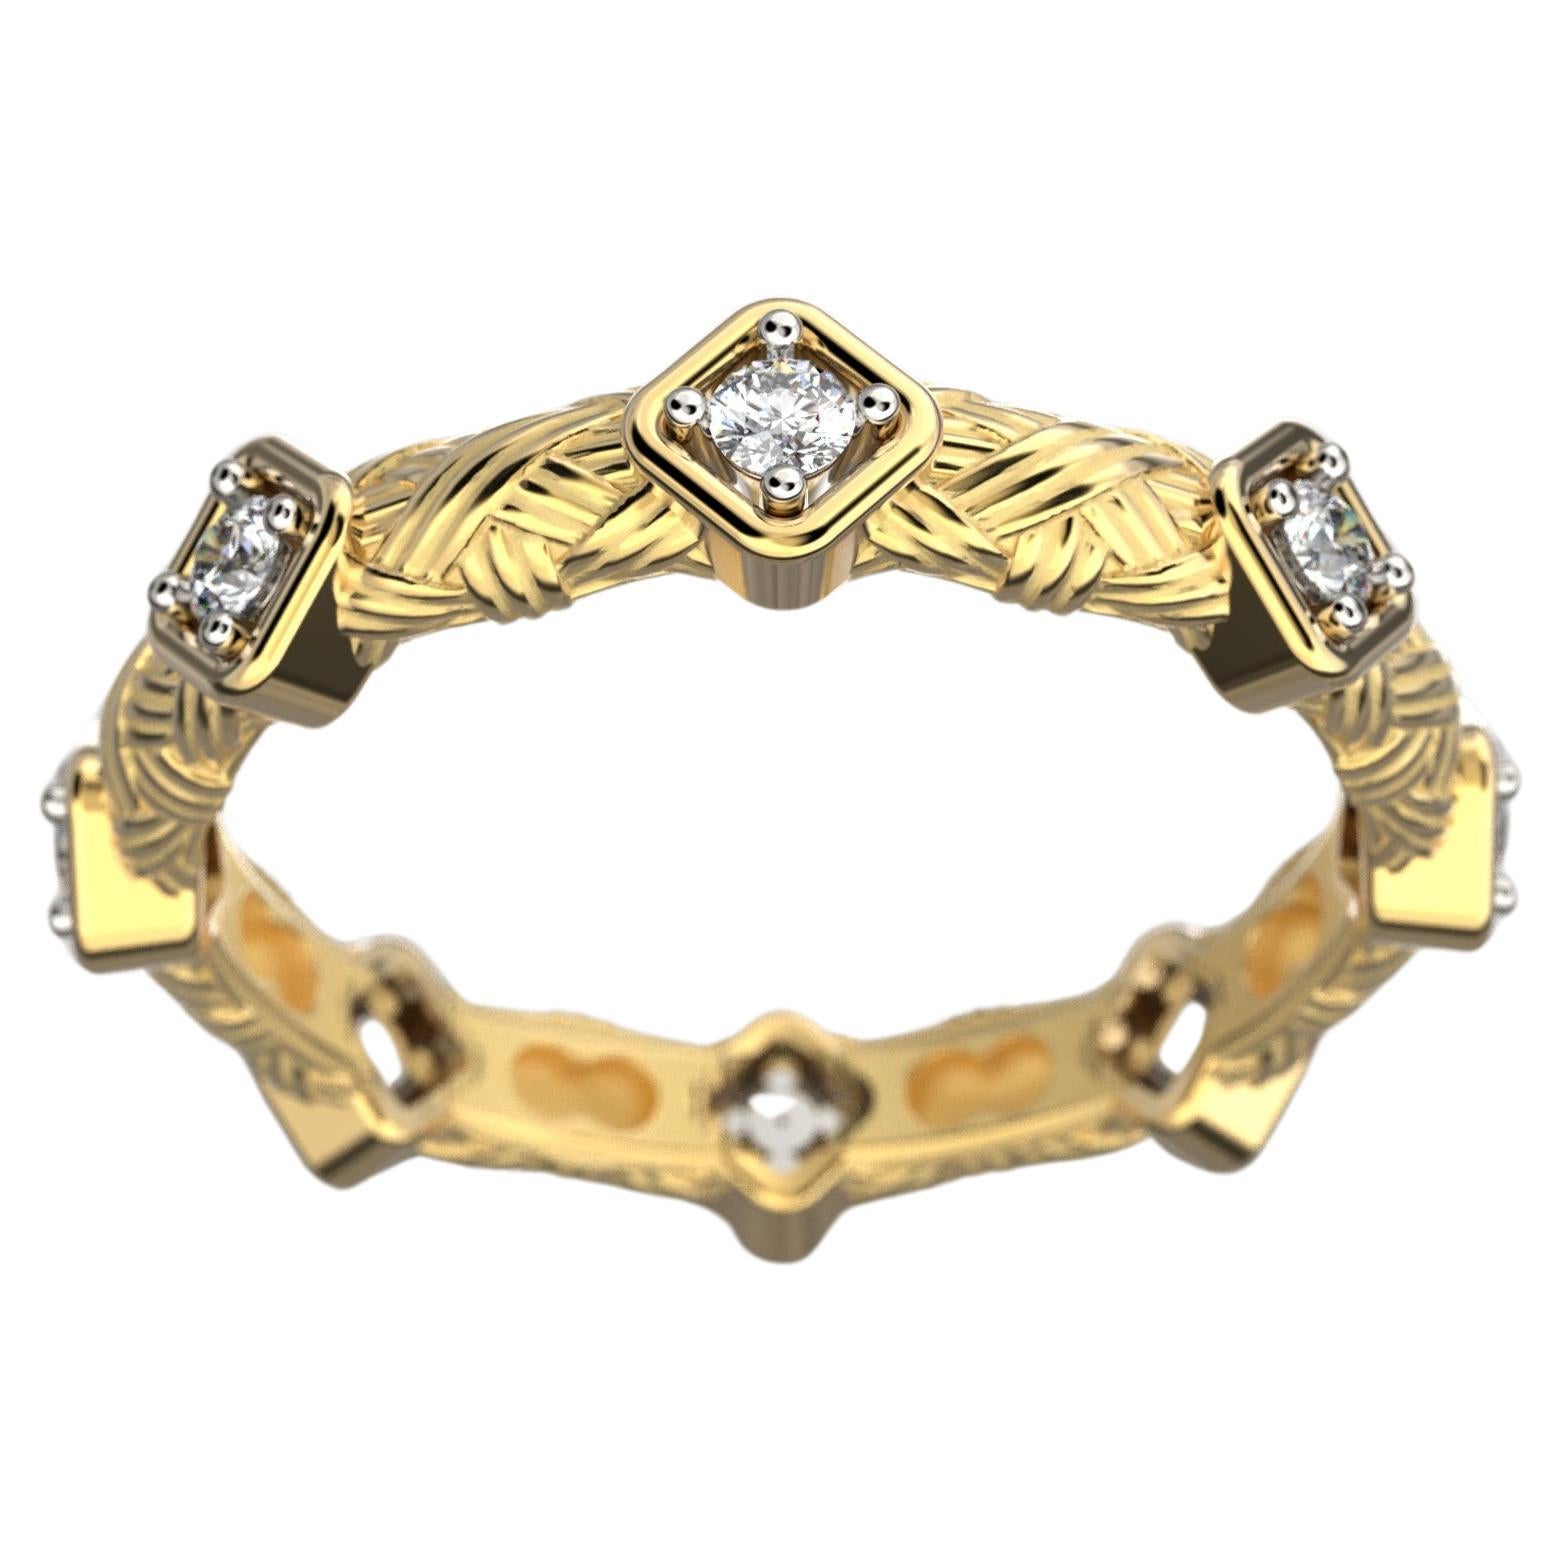 For Sale:  14k Gold Eight Diamond Band Ring  Made in Italy by Oltremare Gioielli